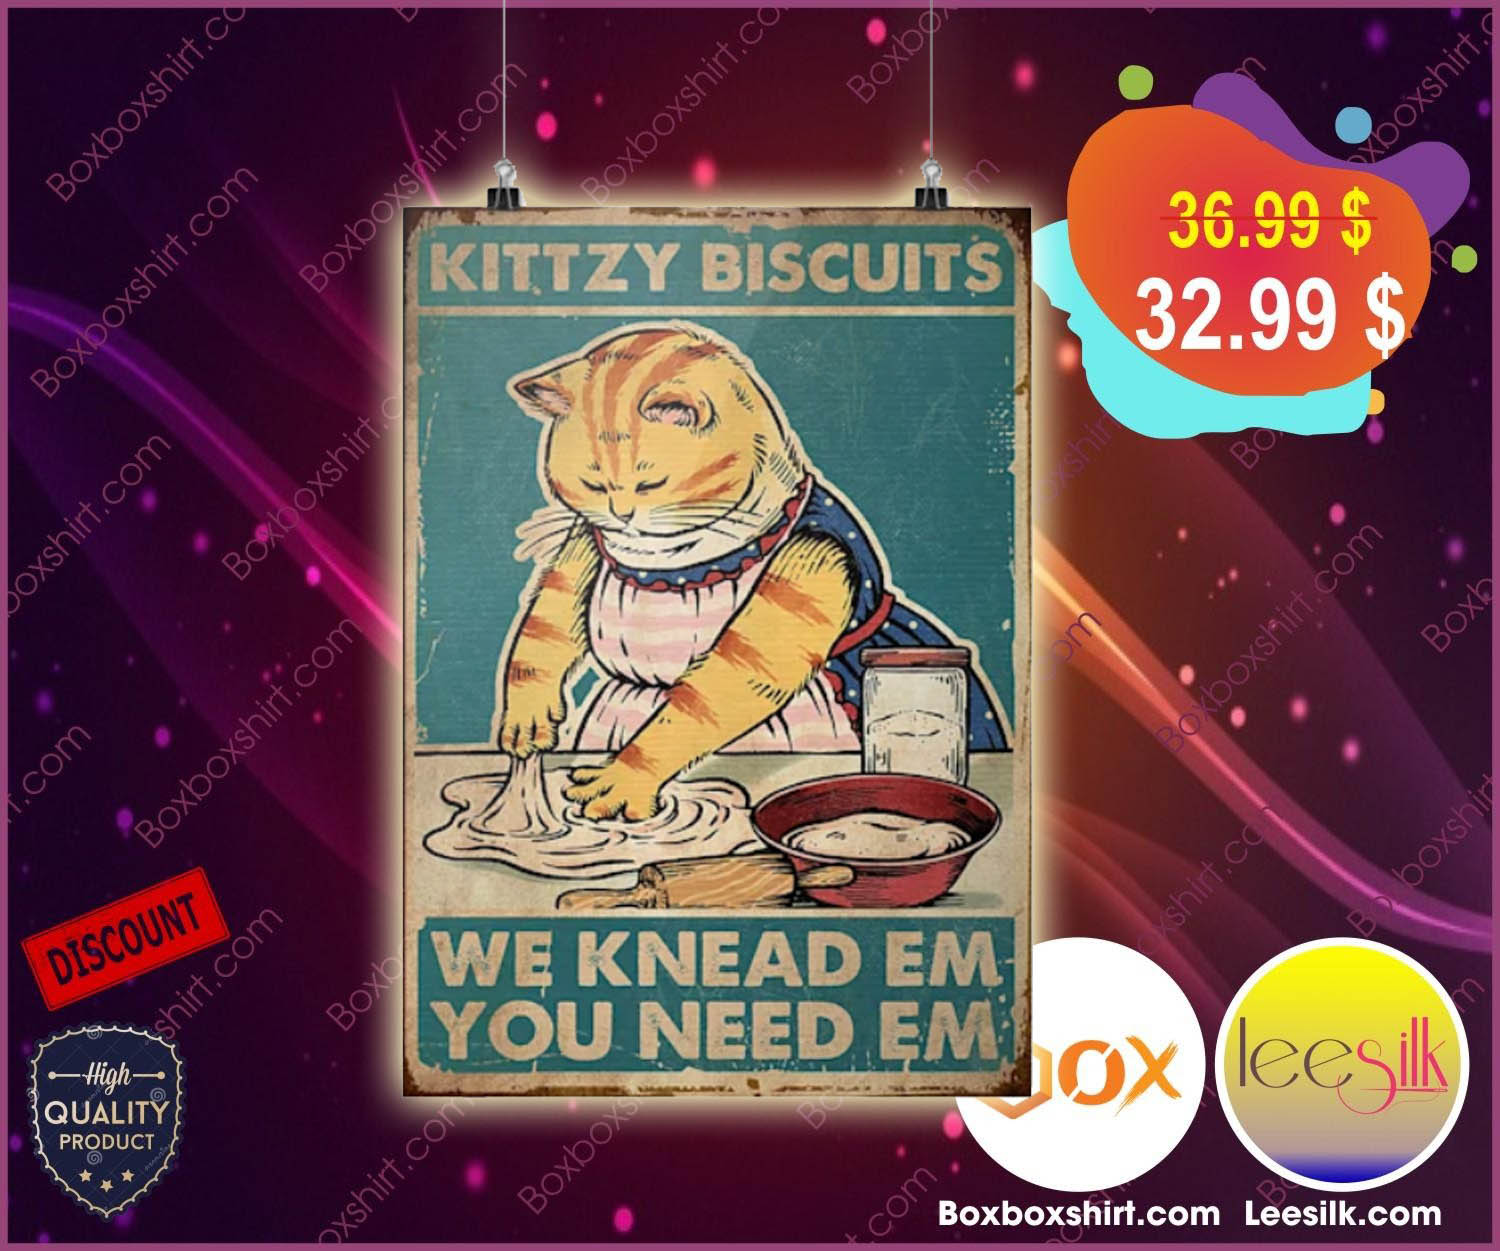 Kittzy biscuits we knead em you need em poster 2